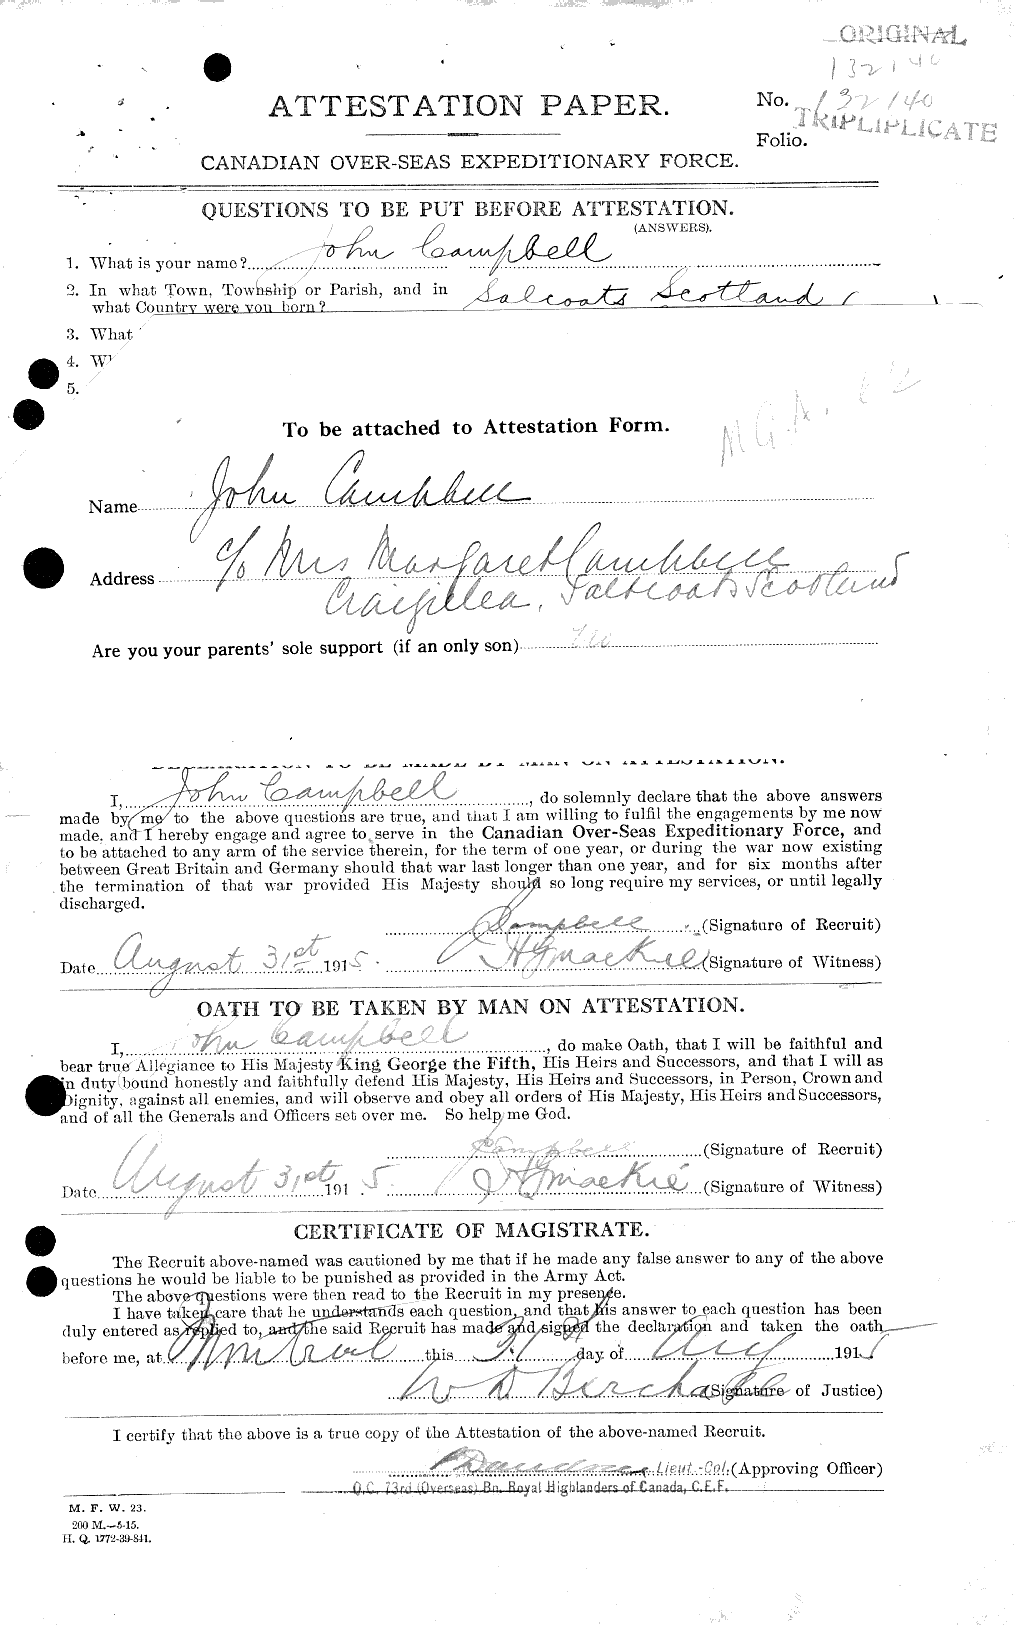 Personnel Records of the First World War - CEF 006811c